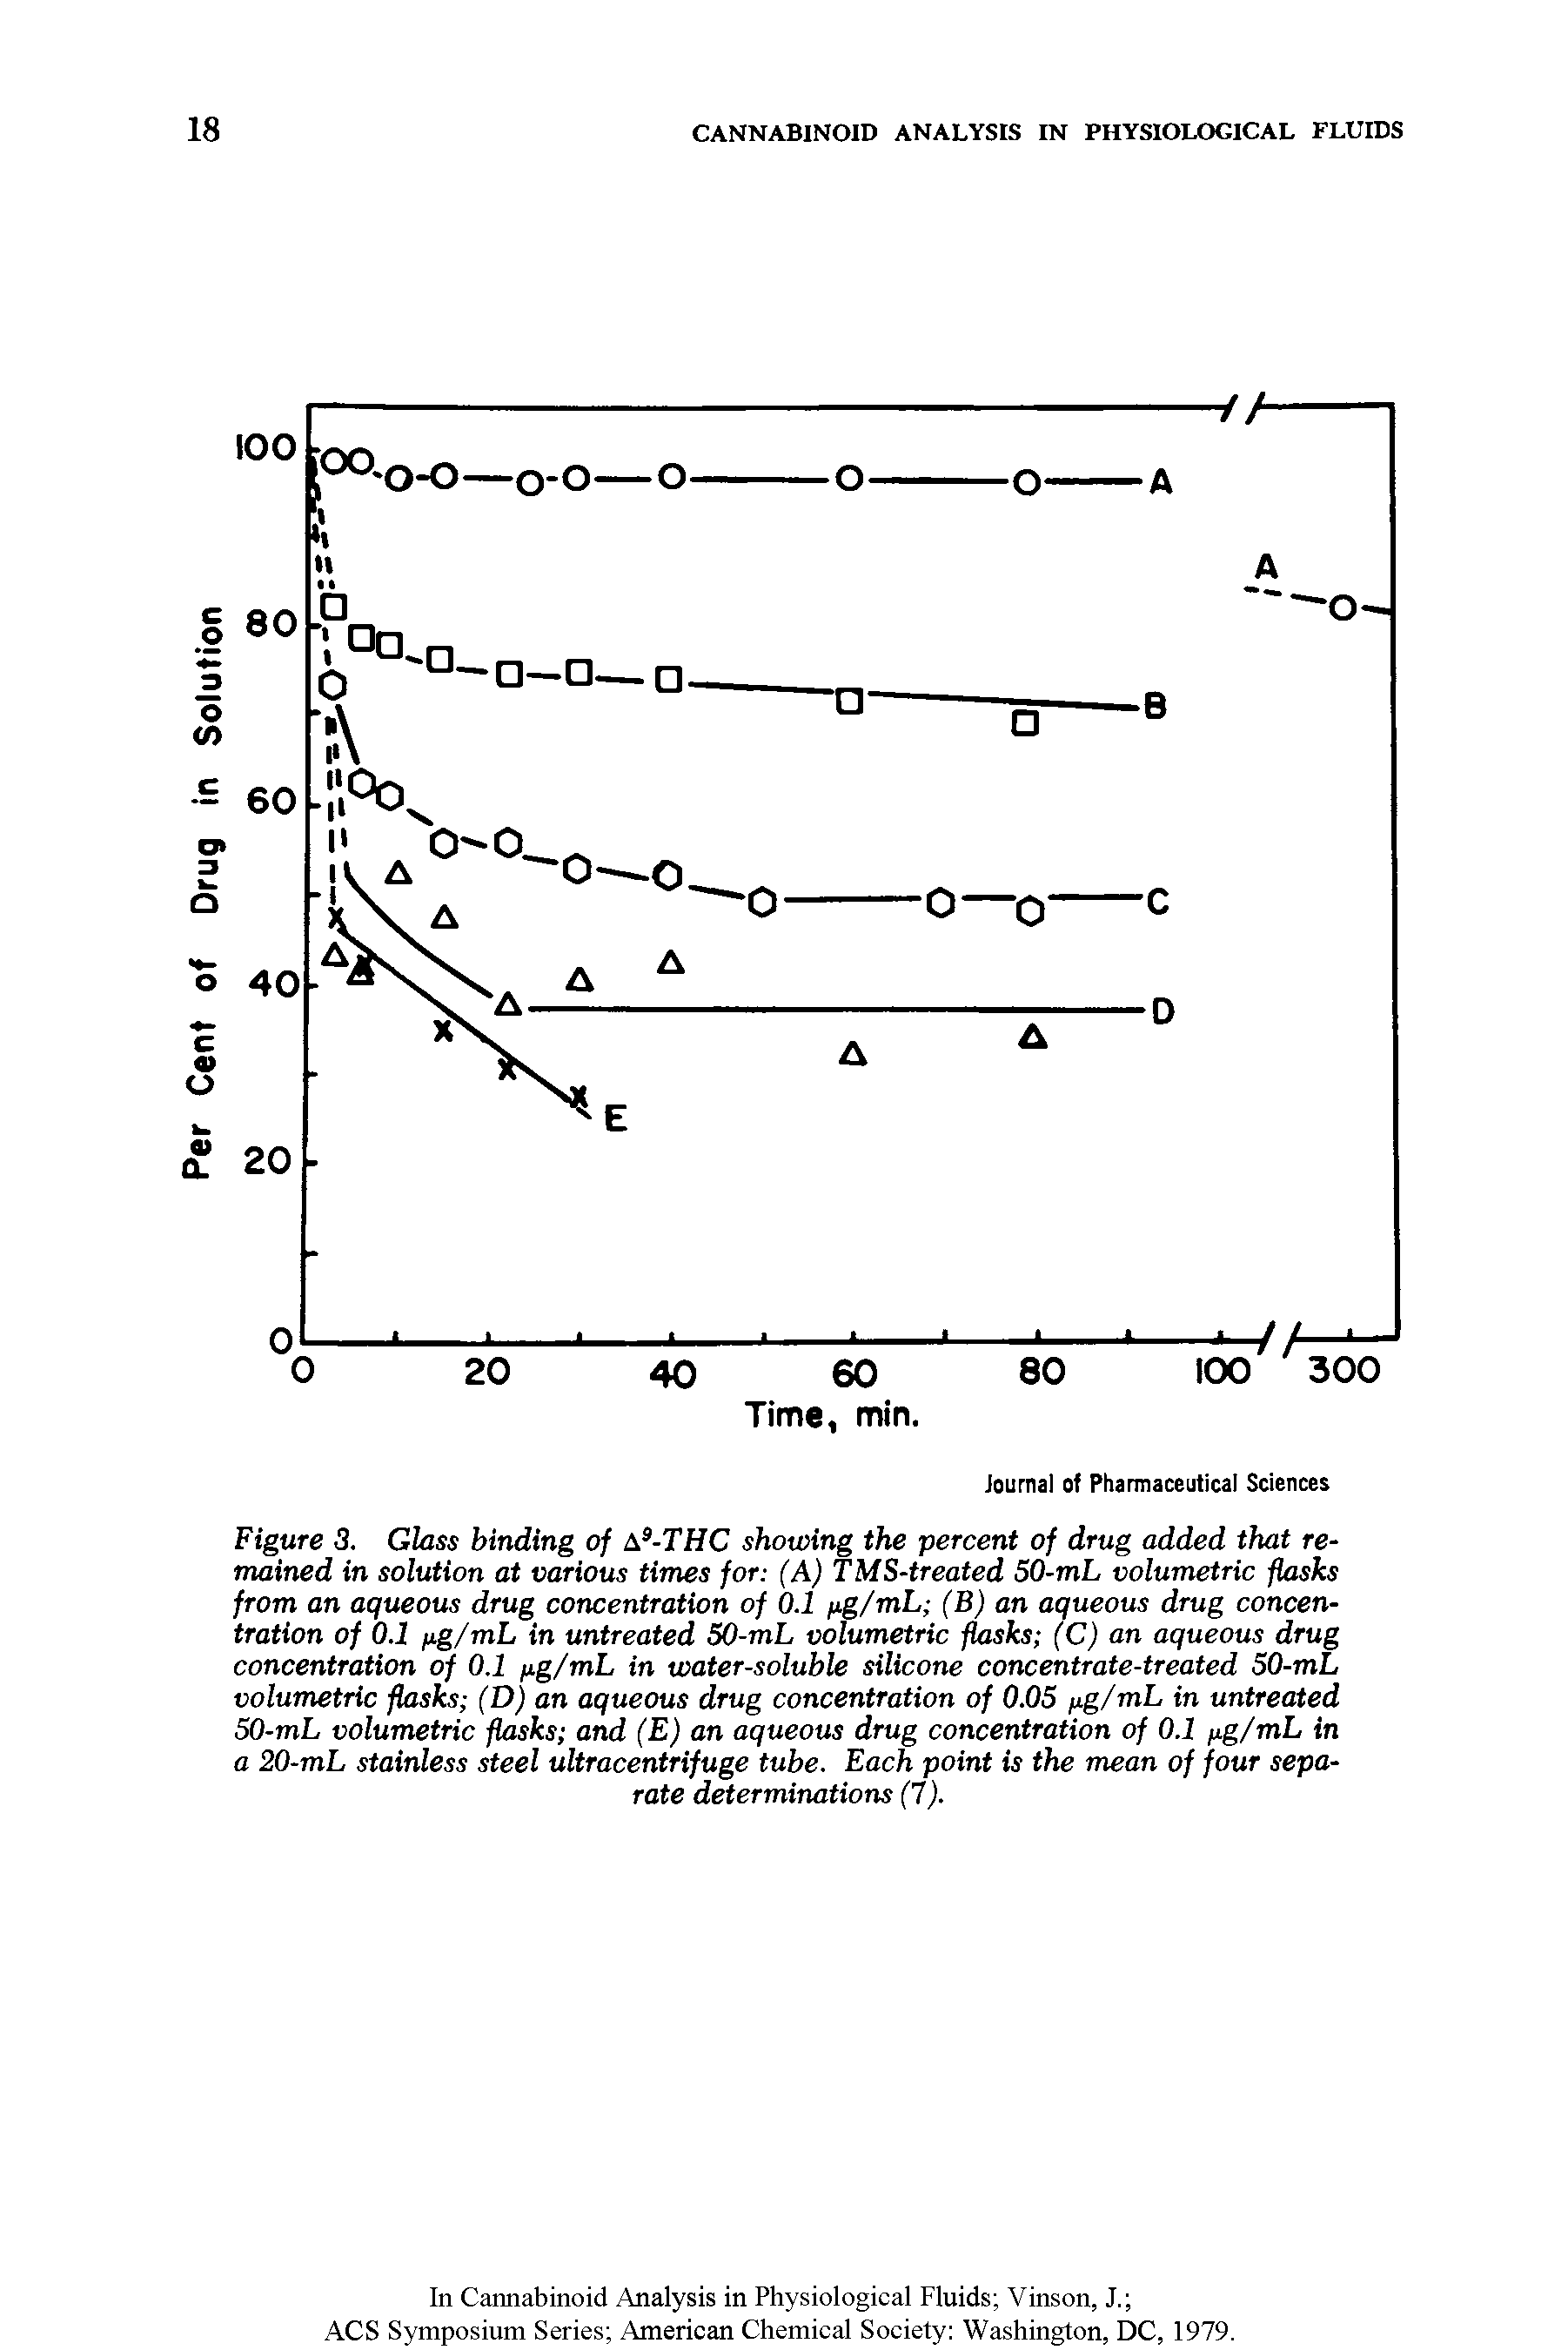 Figure 3. Glass binding of ts -THC showing the percent of drug added that remained in solution at various times for (A) TMS-treated 50-mL volumetric flasks from an aqueous drug concentration of 0.1 ng/mL (B) an aqueous drug concentration of 0.1 ng/mL in untreated 50-mL volumetric flasks (C) an aqueous drug concentration of 0.1 ng/mL in water-soluble silicone concentrate-treated 50-mL volumetric flasks (D) an aqueous drug concentration of 0.05 pg/mL in untreated 50-mL volumetric flasks and (E) an aqueous drug concentration of 0.1 pg/mL in a 20-mL stainless steel ultracentrifuge tube. Each point is the mean of four separate determinations (1).